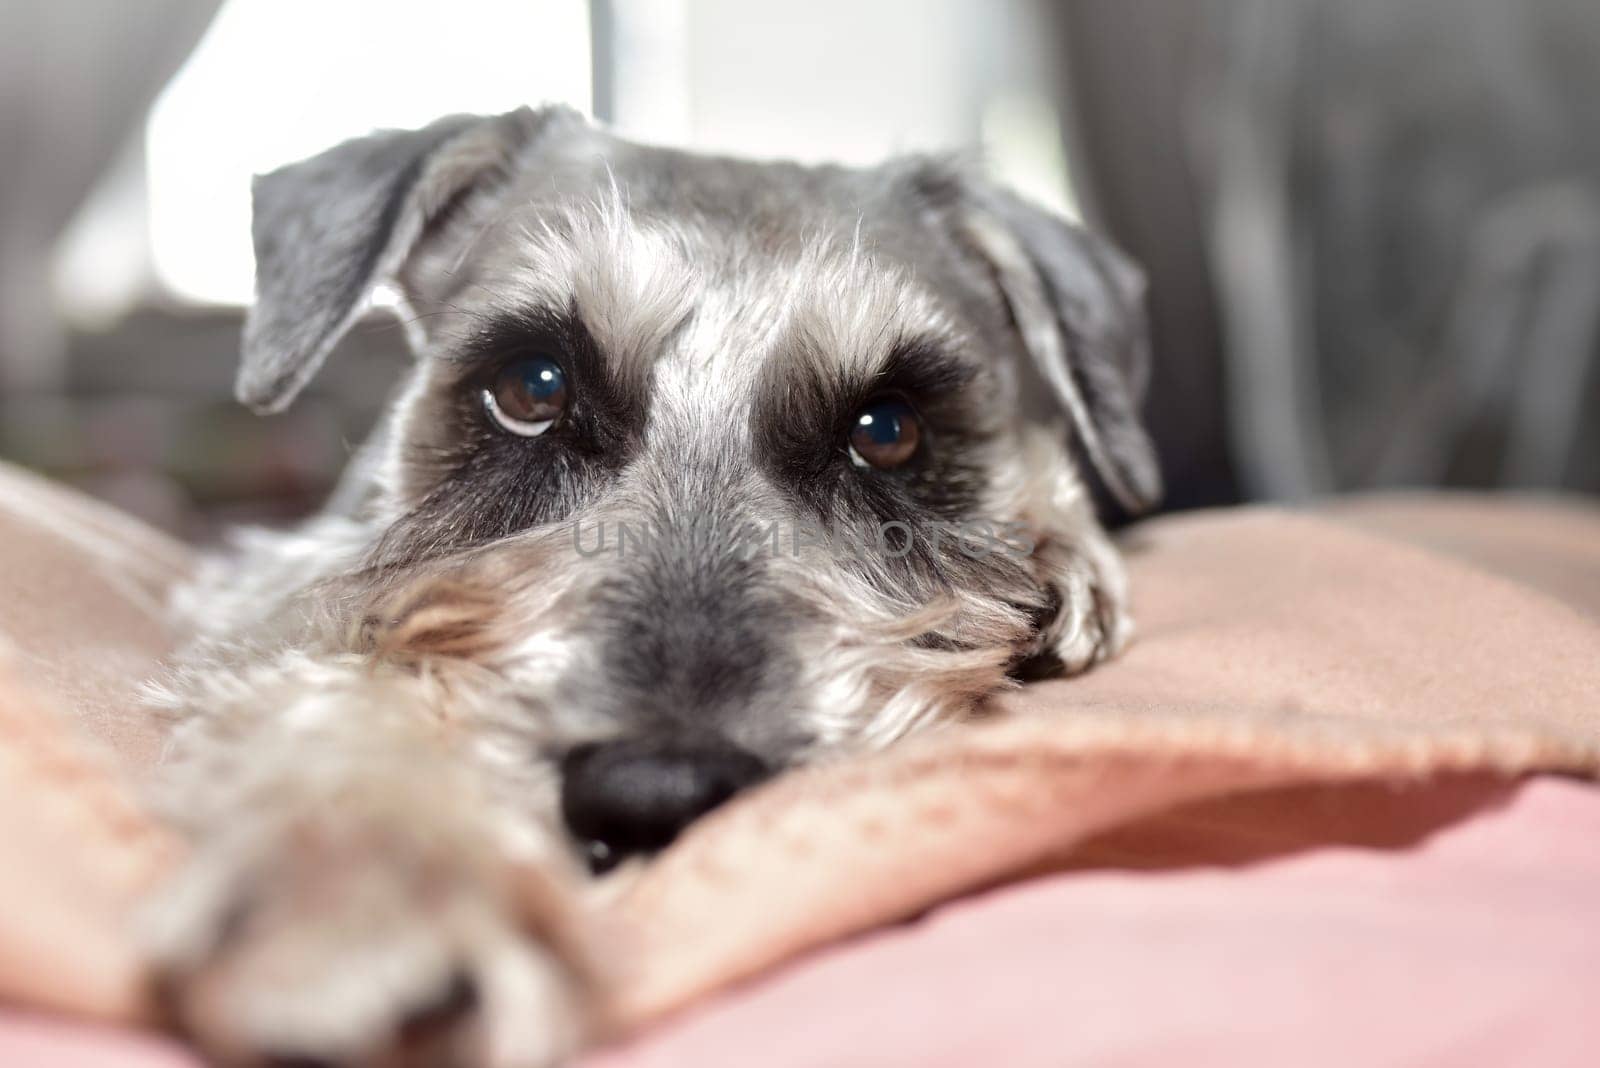 Schnauzer dog is lying on the bed. The dog looks with kind eyes lying on the bed. . by Nickstock